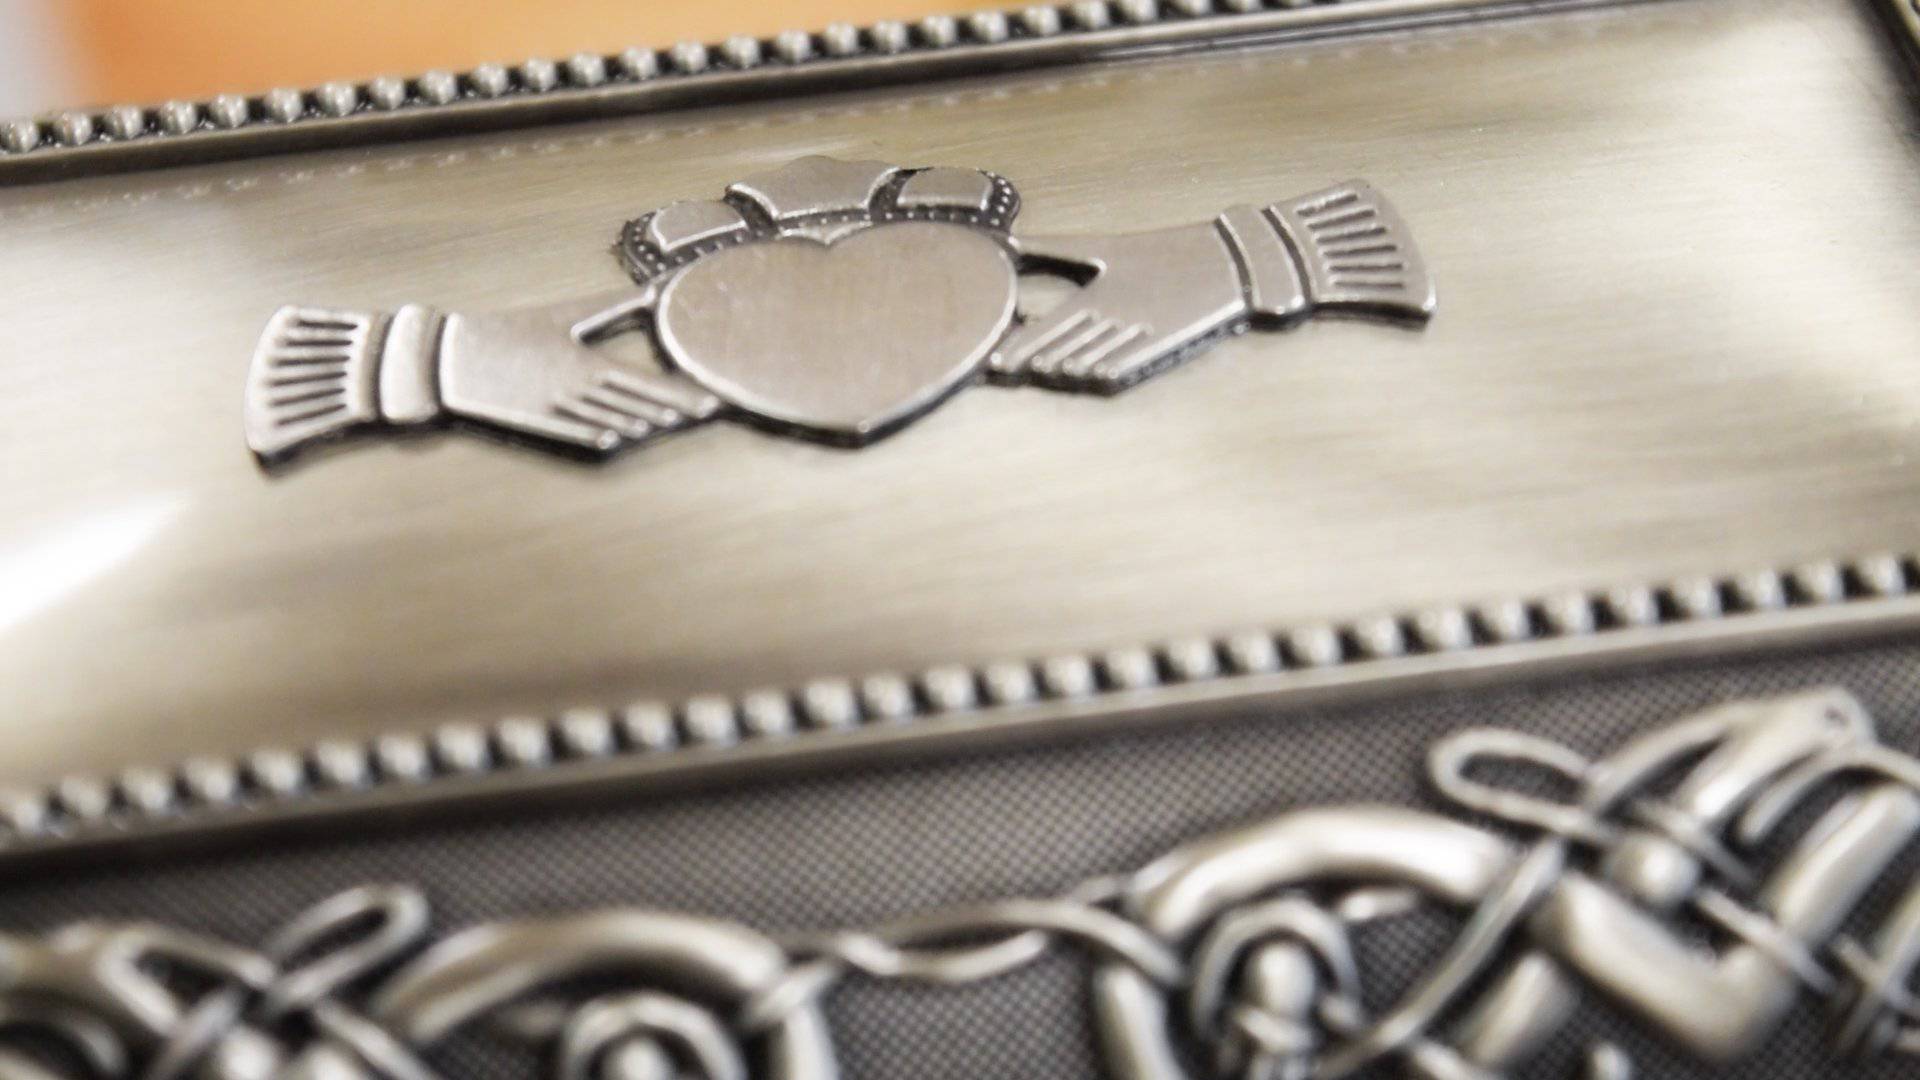 Mullingar Pewter Jewelry Box with Celtic & Claddagh Design